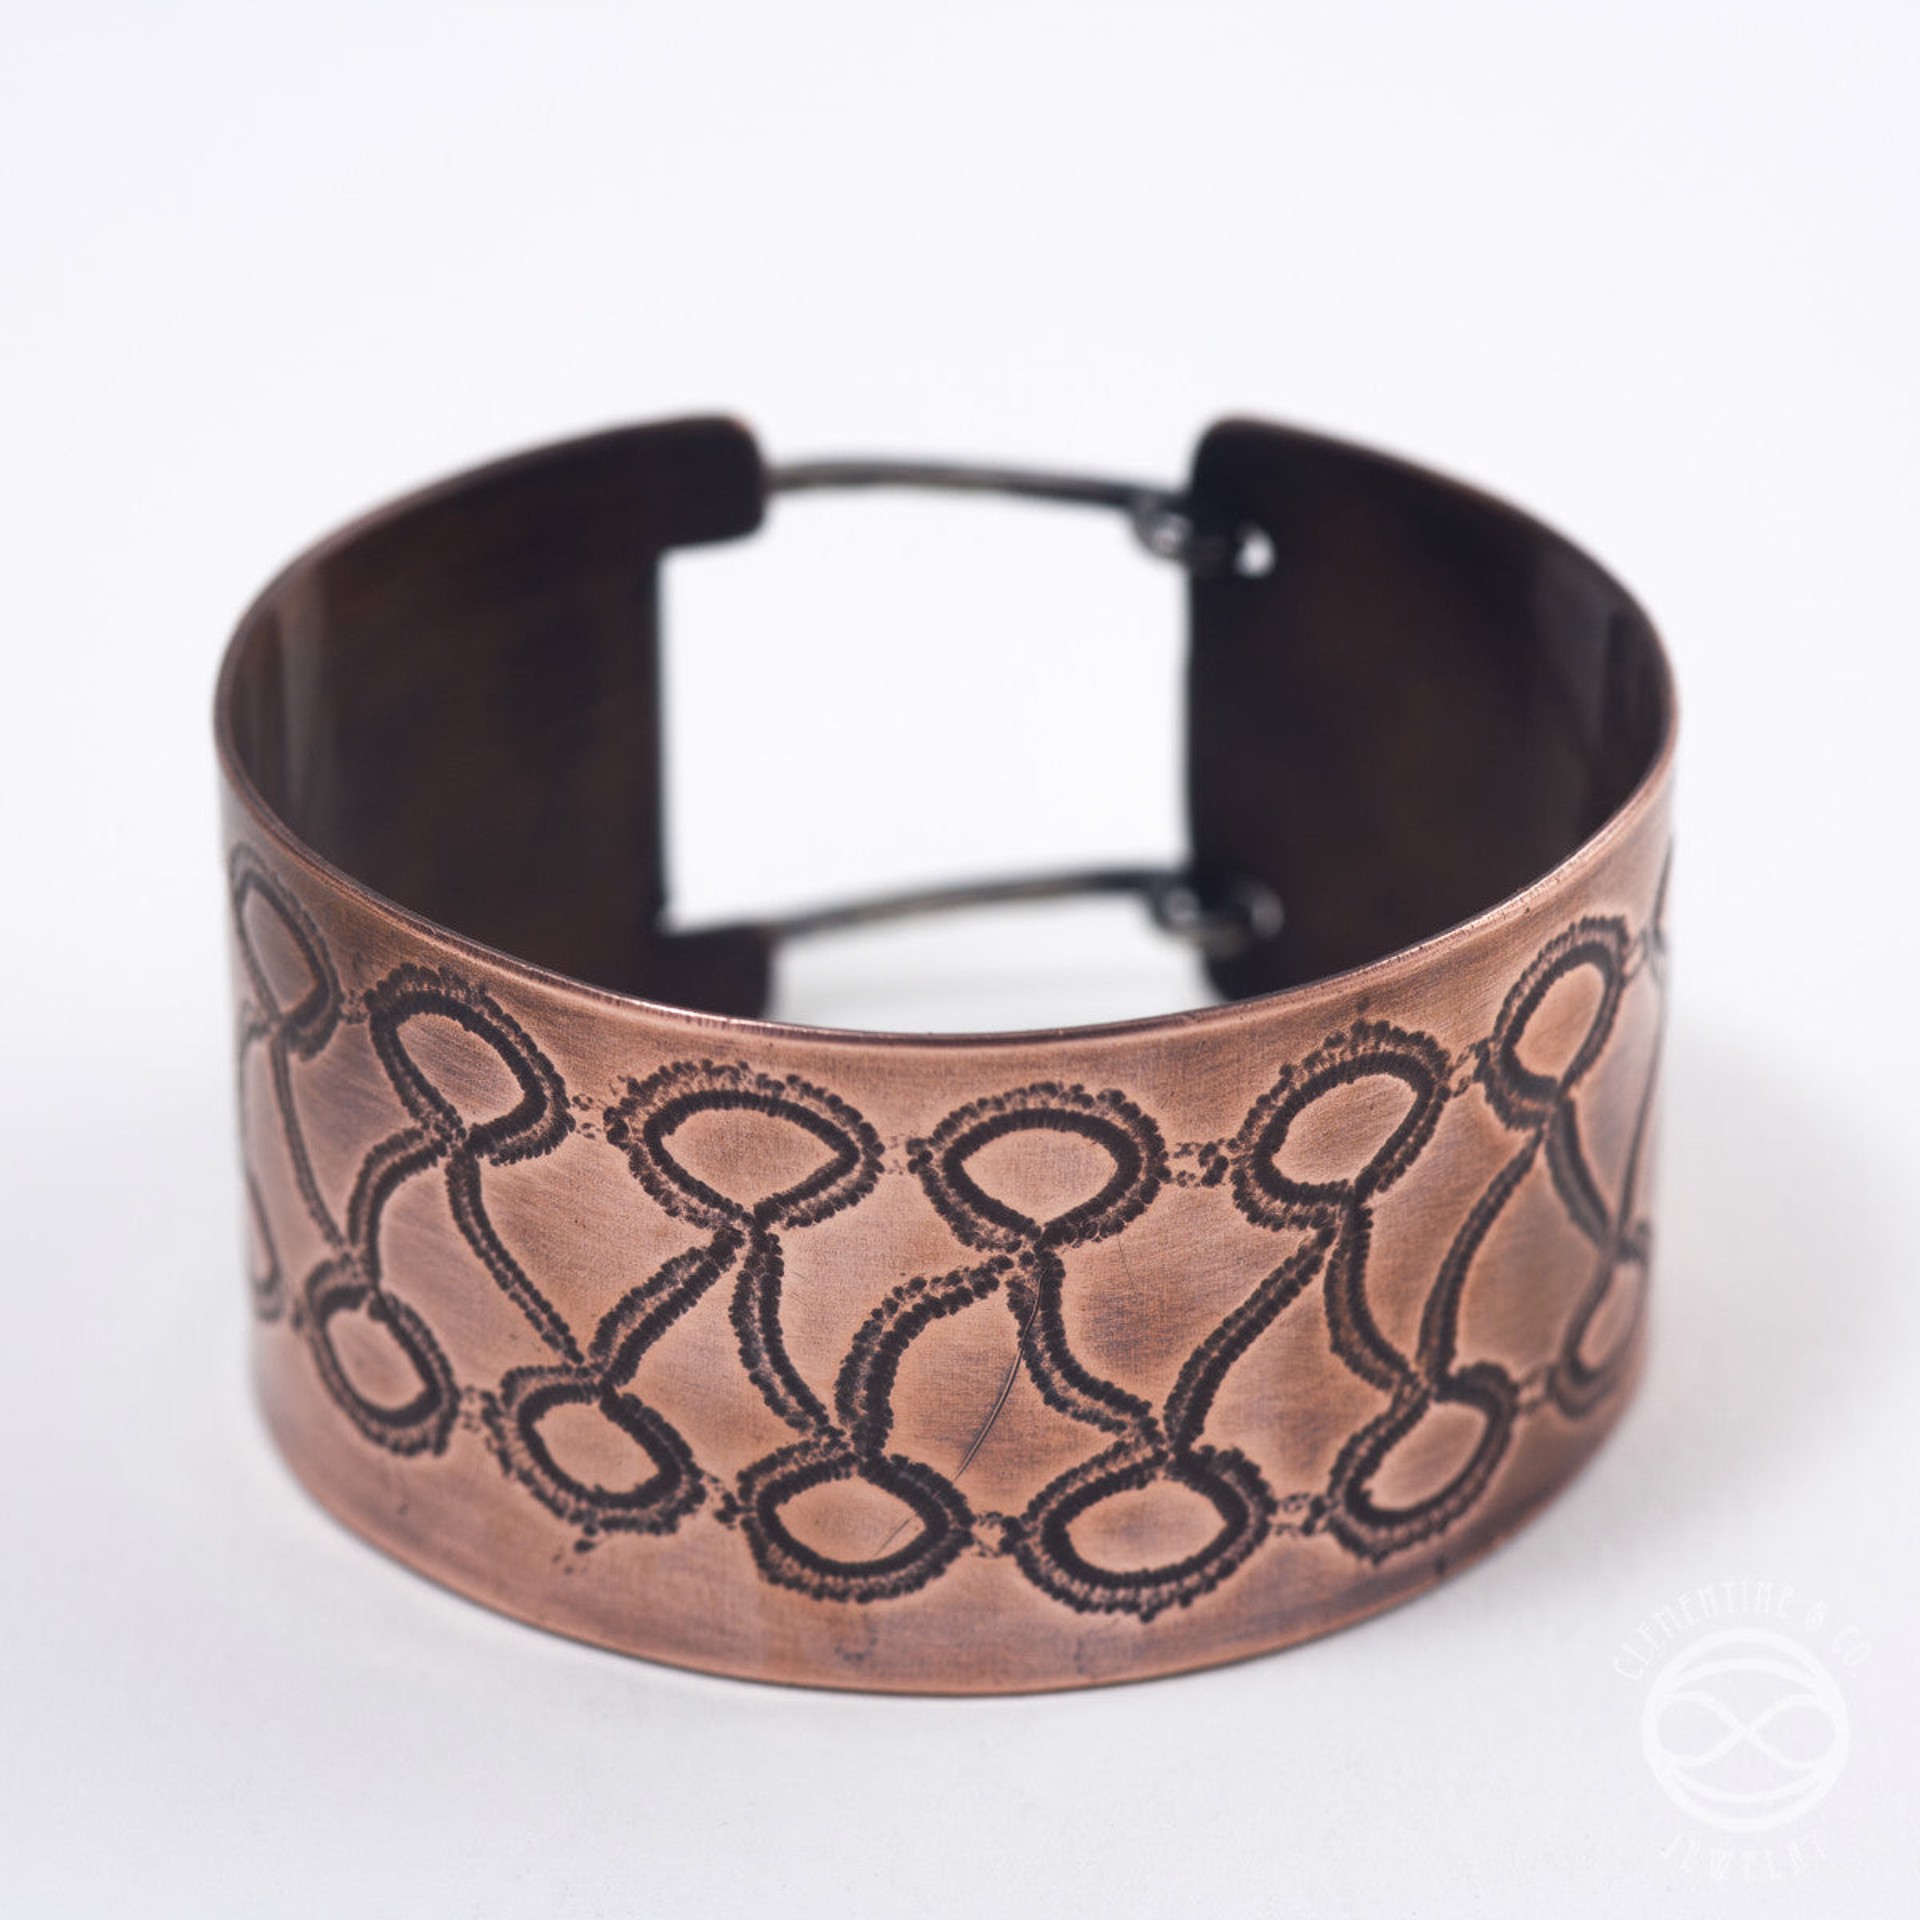 Vintage Lace Buckle Cuff - copper / large by Clementine & Co. Jewelry